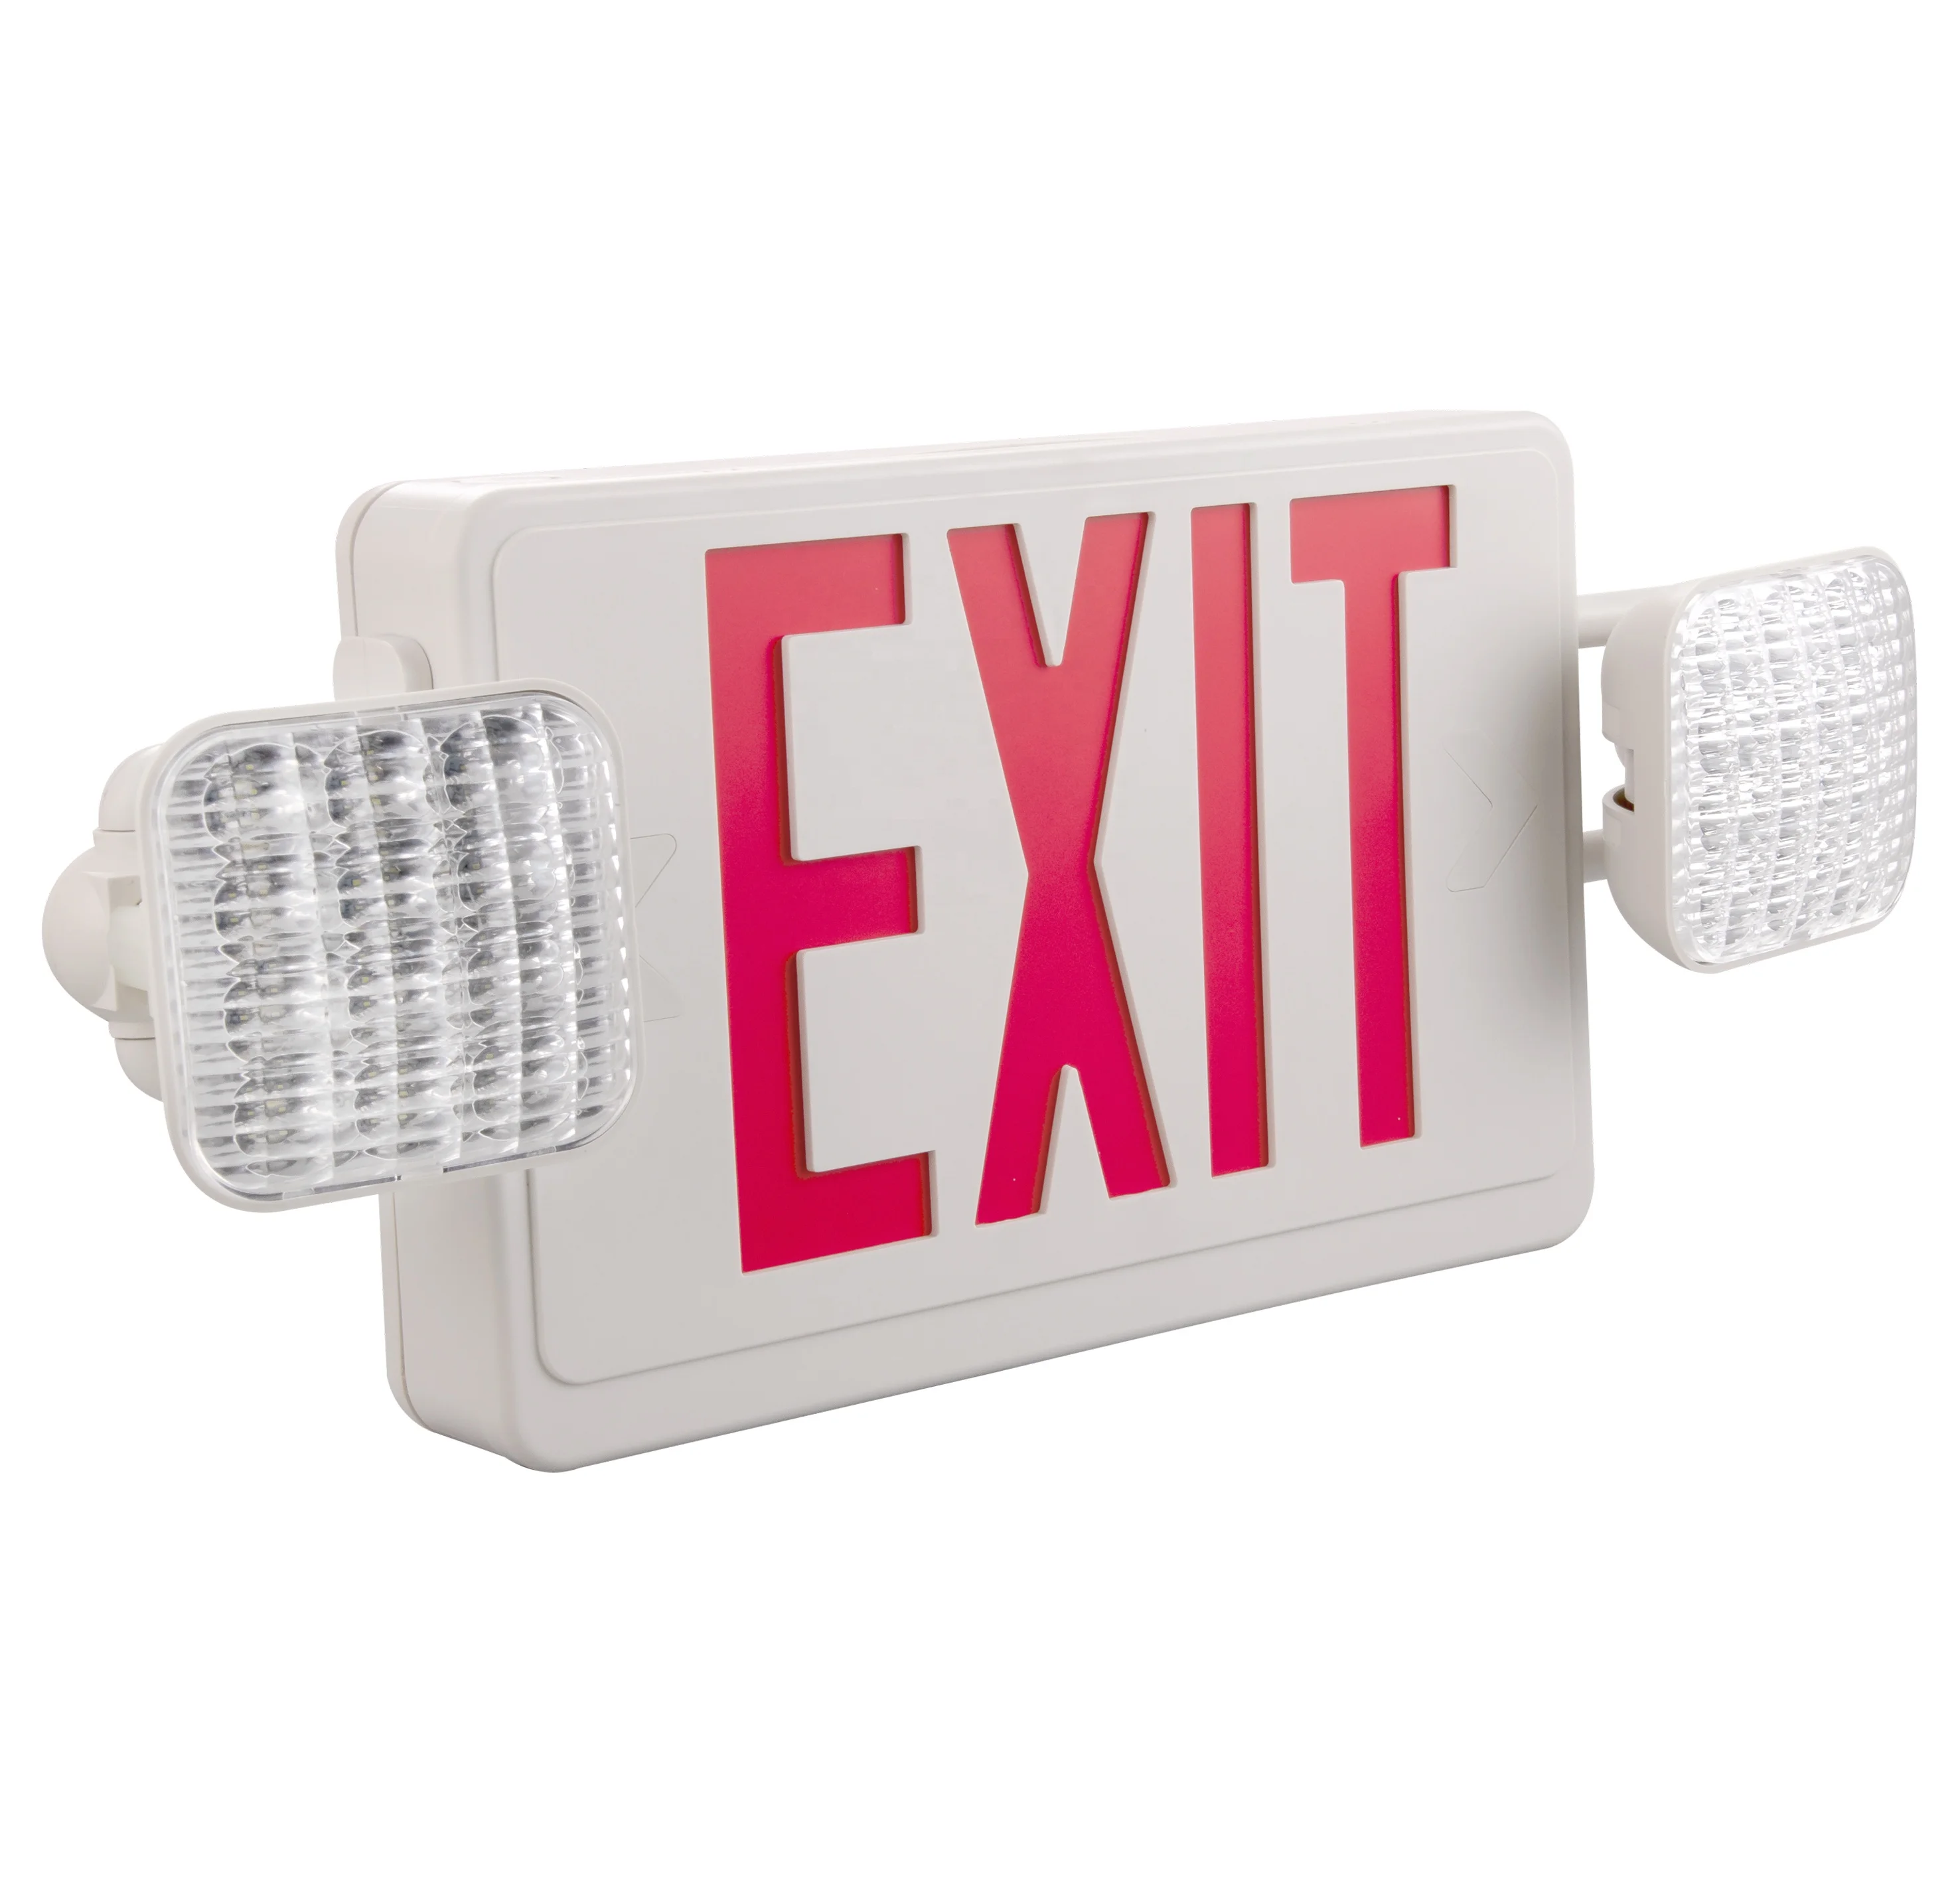 2020 High quality cost-effective products two fully adjustable twin spot light emergency exit combo sign